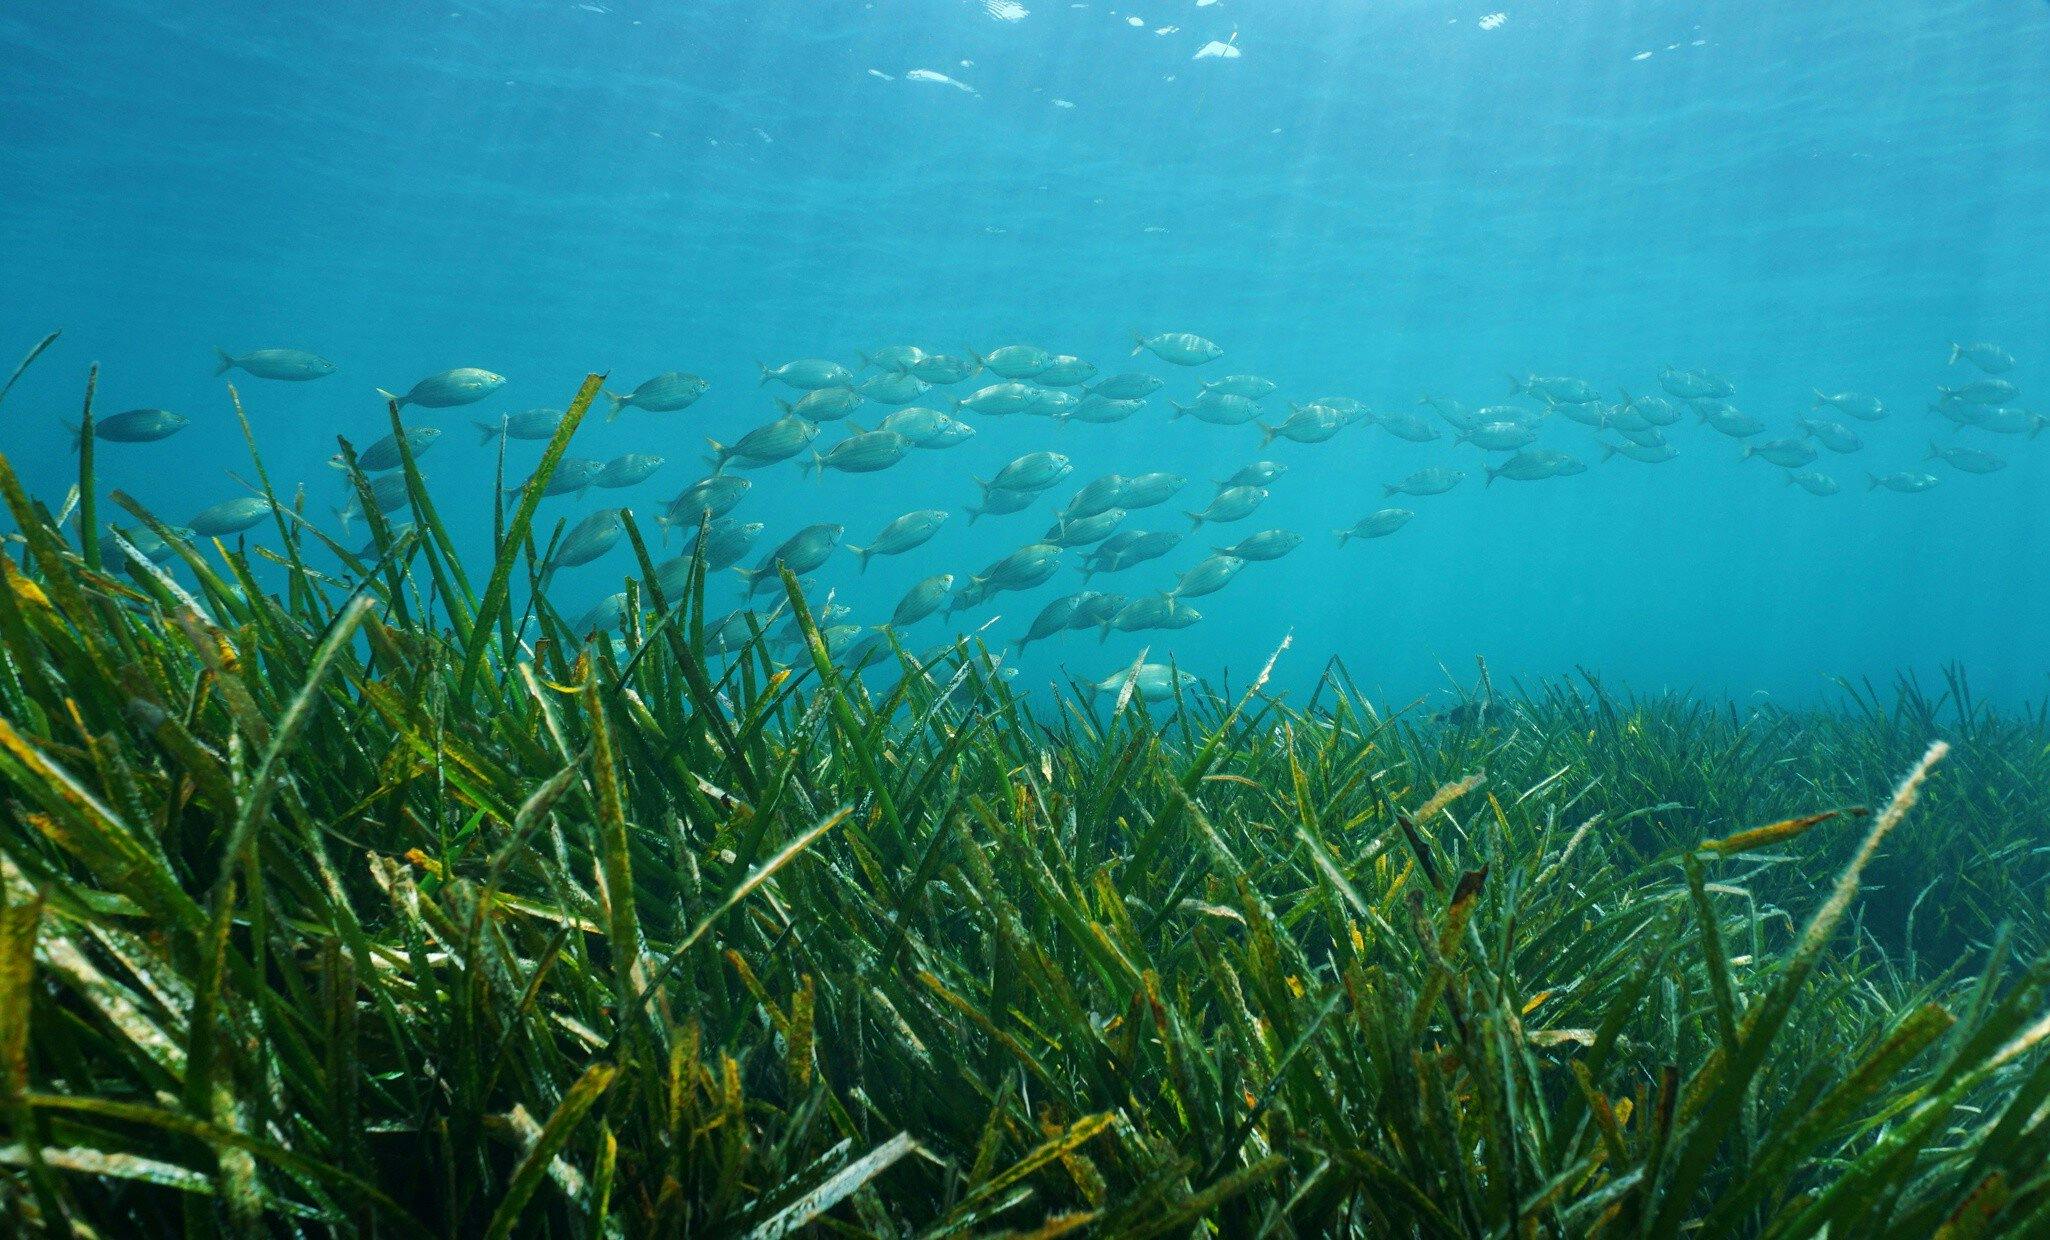 Seagrass stock image